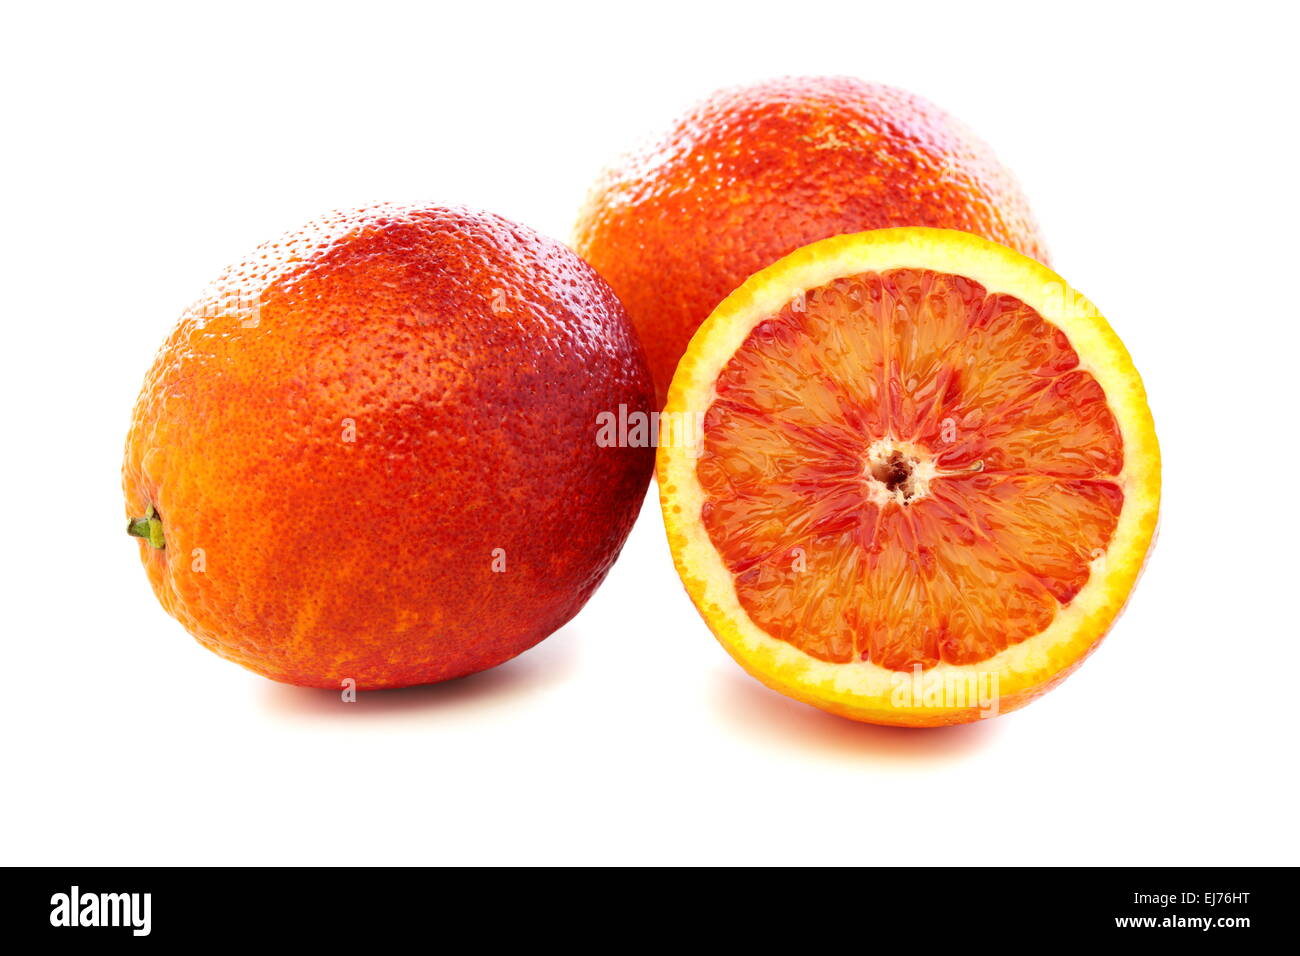 Full and half of blood red oranges. Stock Photo